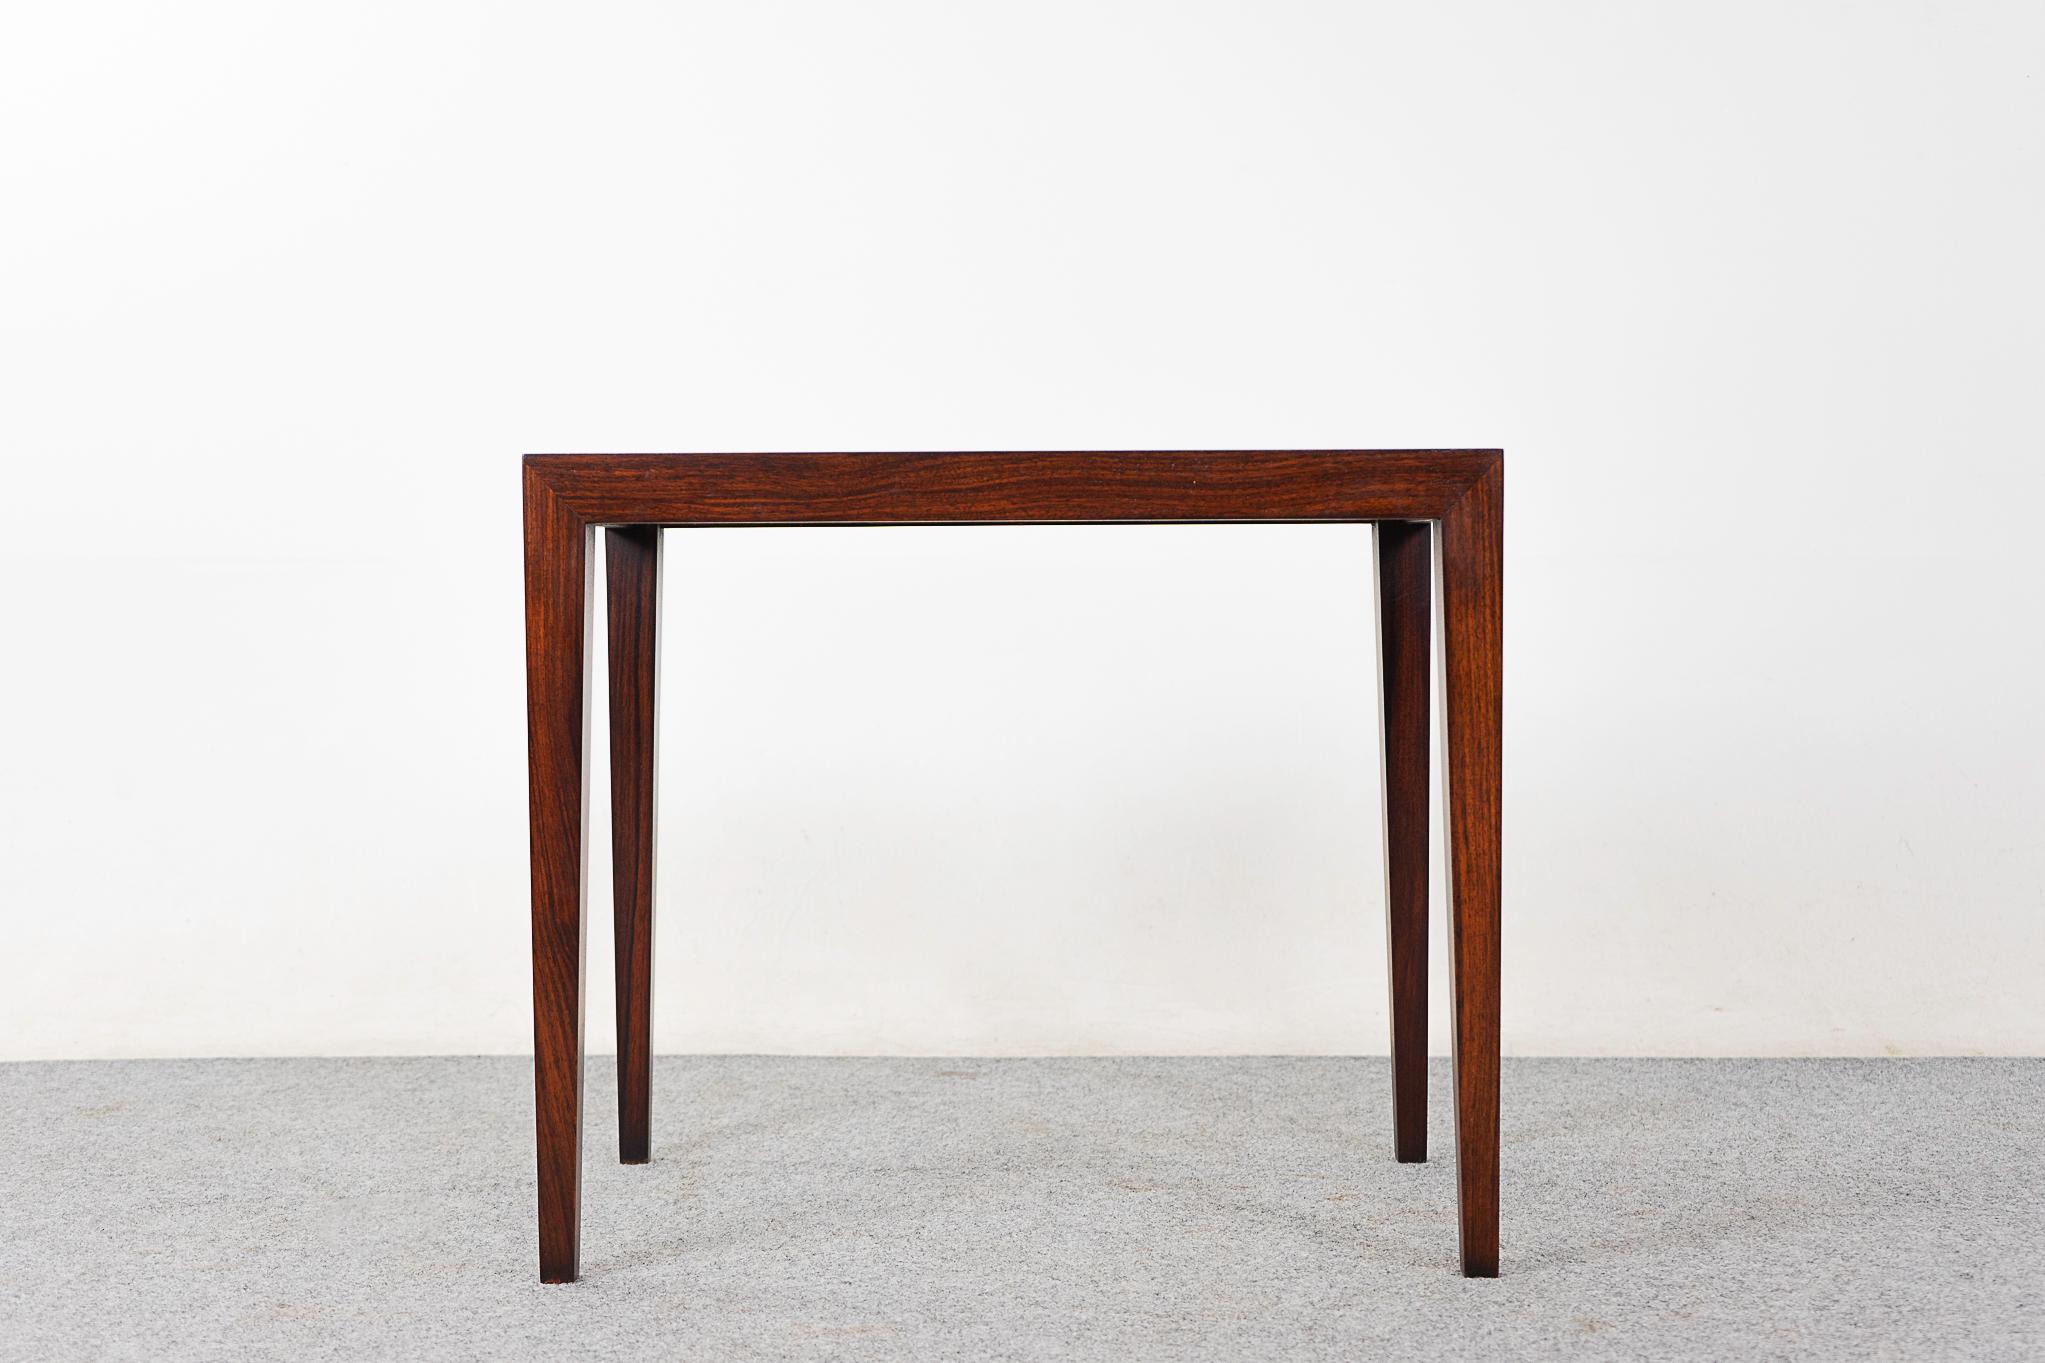 Rosewood mid-century side table by Haslev, circa 1960's. Compact, highly functional table with beautiful corner joinery. Deep rich color and long legs! 